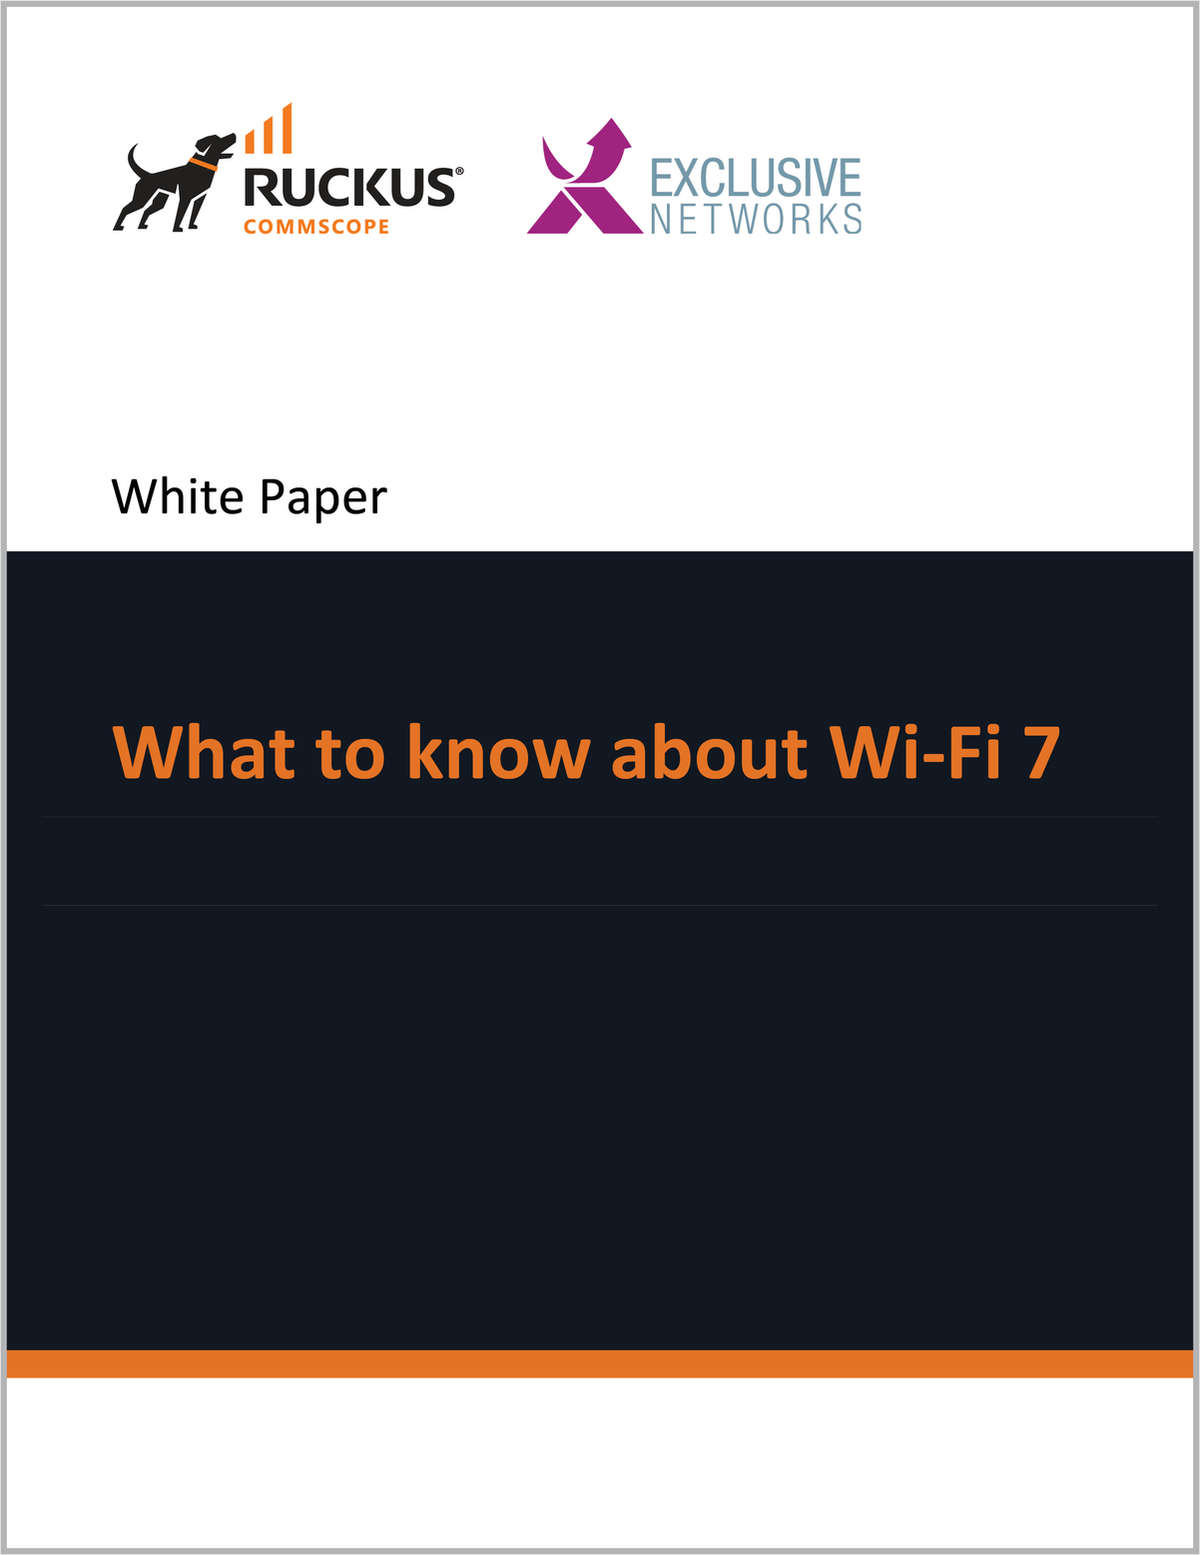 What to know about Wi-FI 7 - by Ruckus Networks